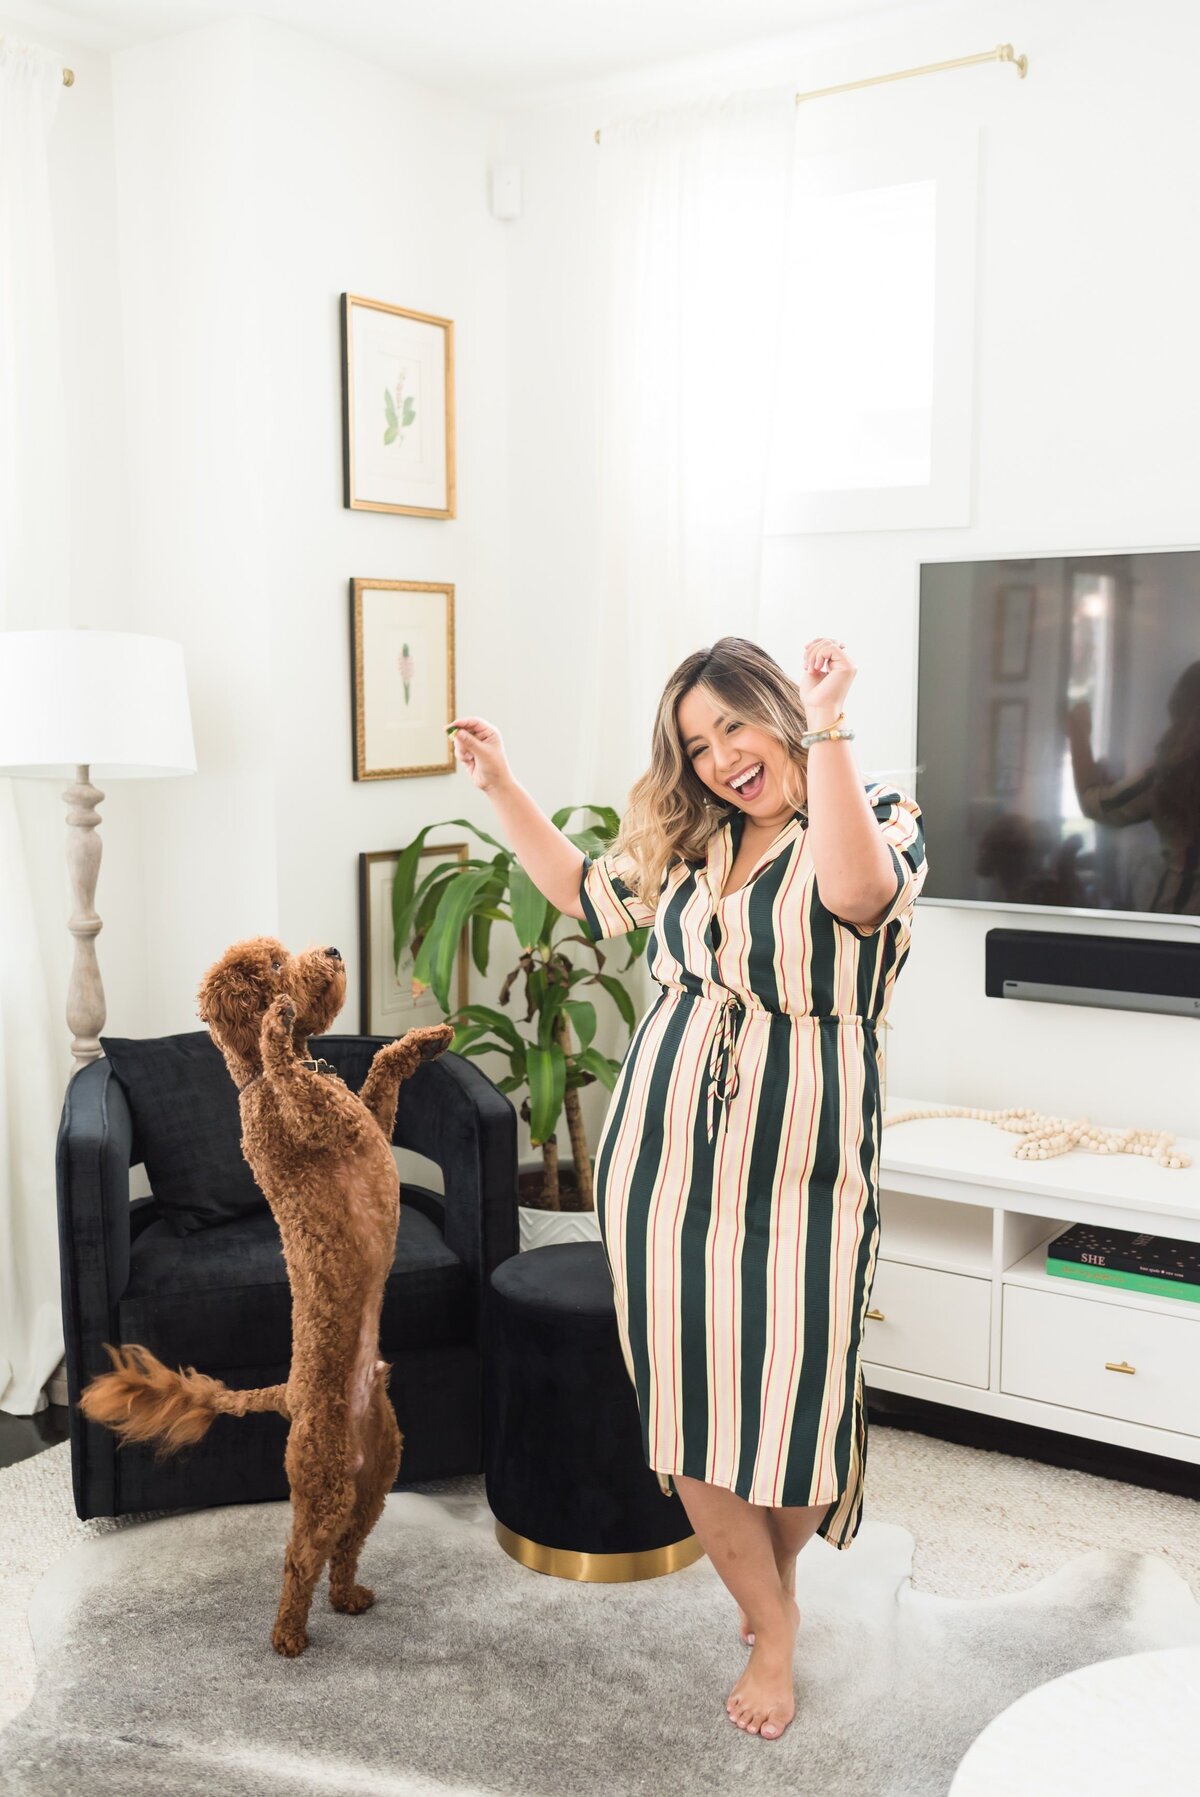 Latina business owner dancing with her dog in a living room for fun and casual personal brand photos